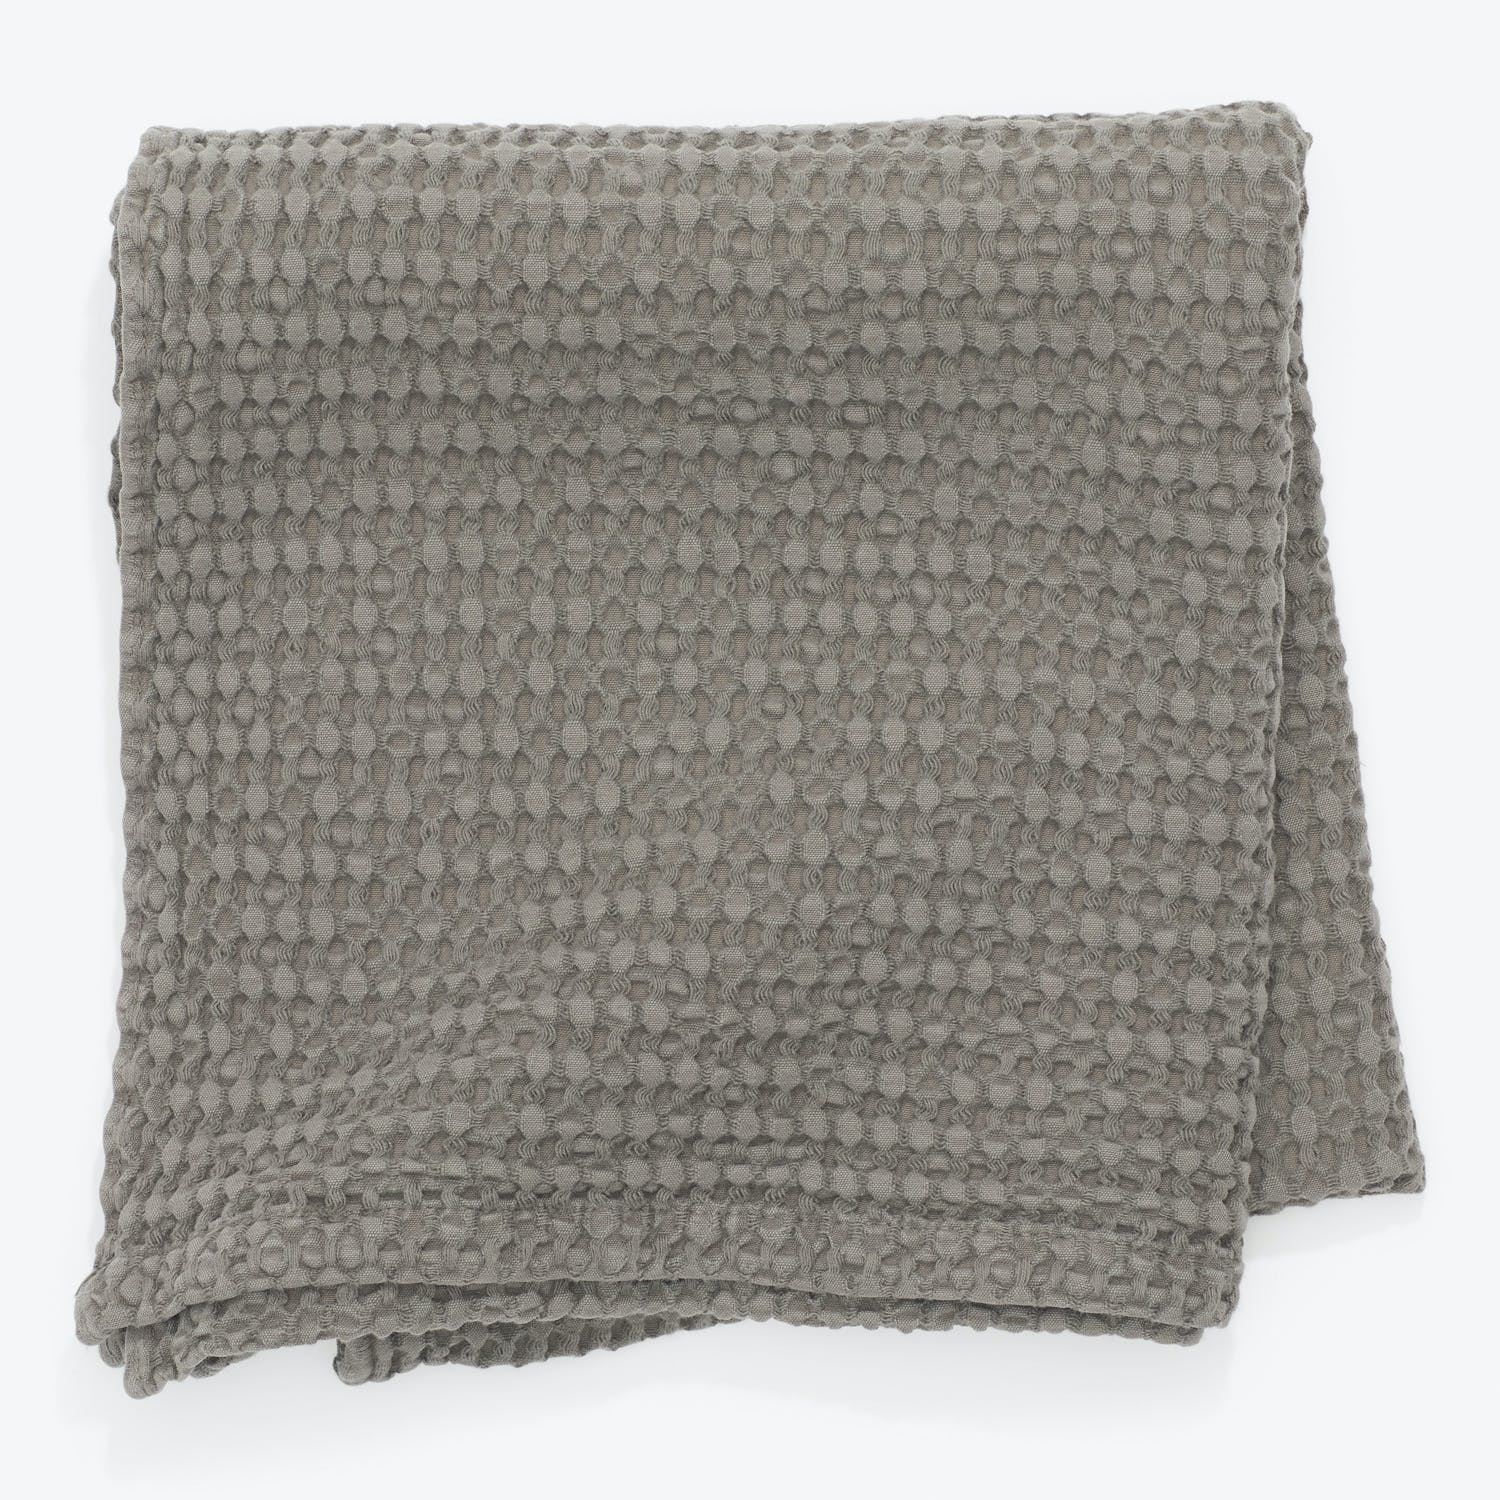 Gray textured throw with raised circular patterns adds cozy charm.